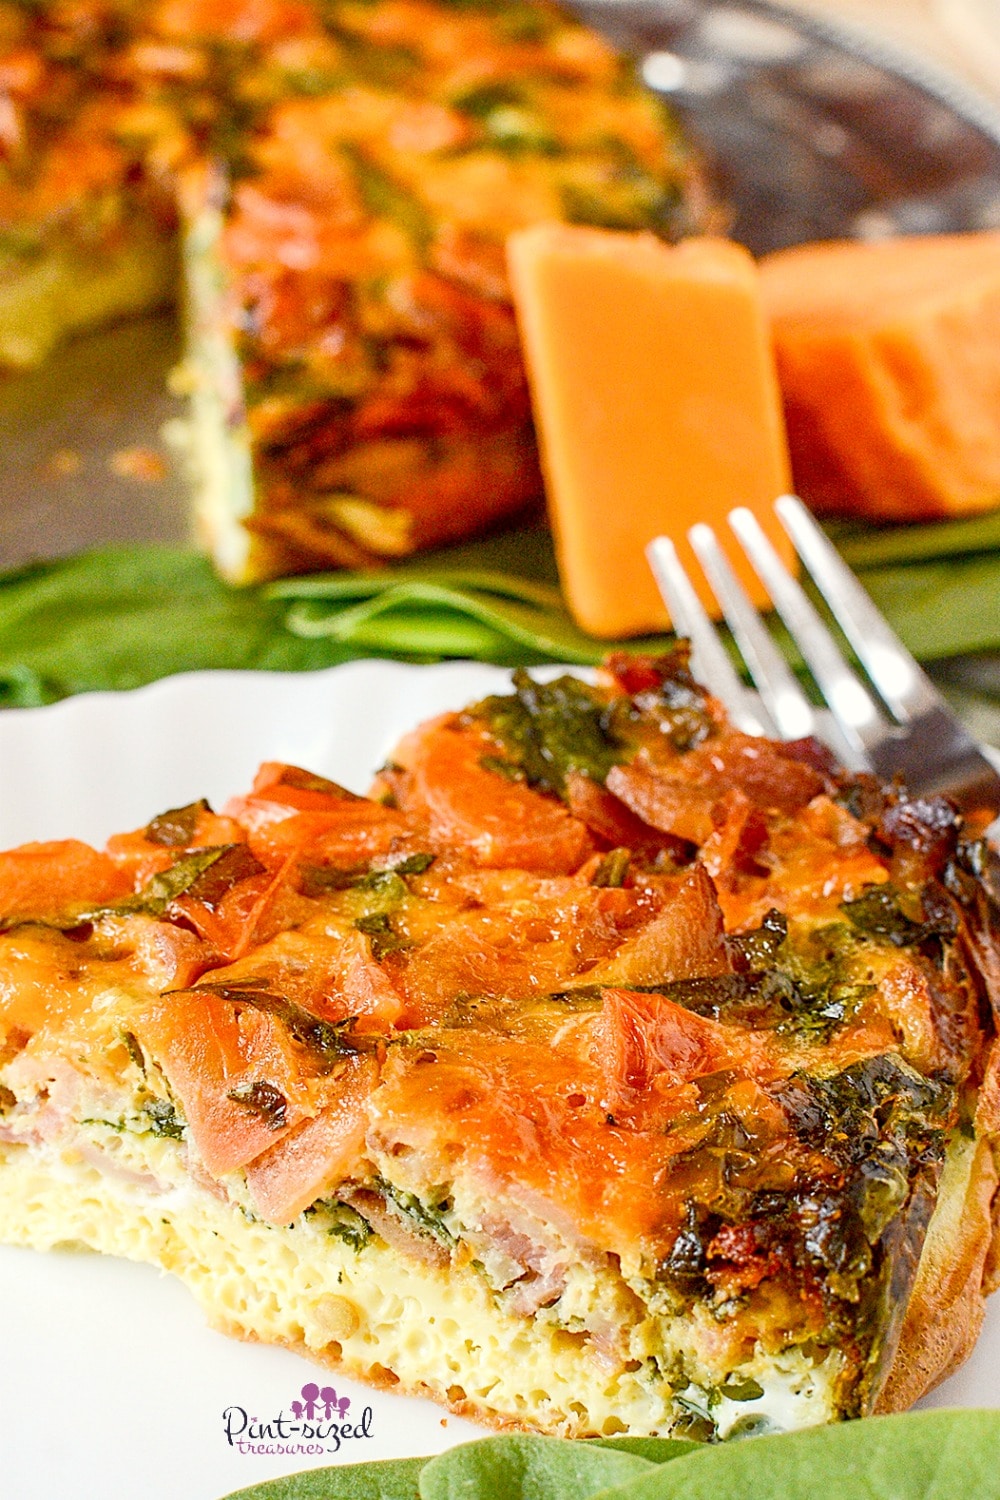 Spinach, cheese, eggs and other simple ingredients create the perfect, slow cooker spinach frittata! Grab your crock pot and get ready to Crete an amazing spinach frittata recipe!